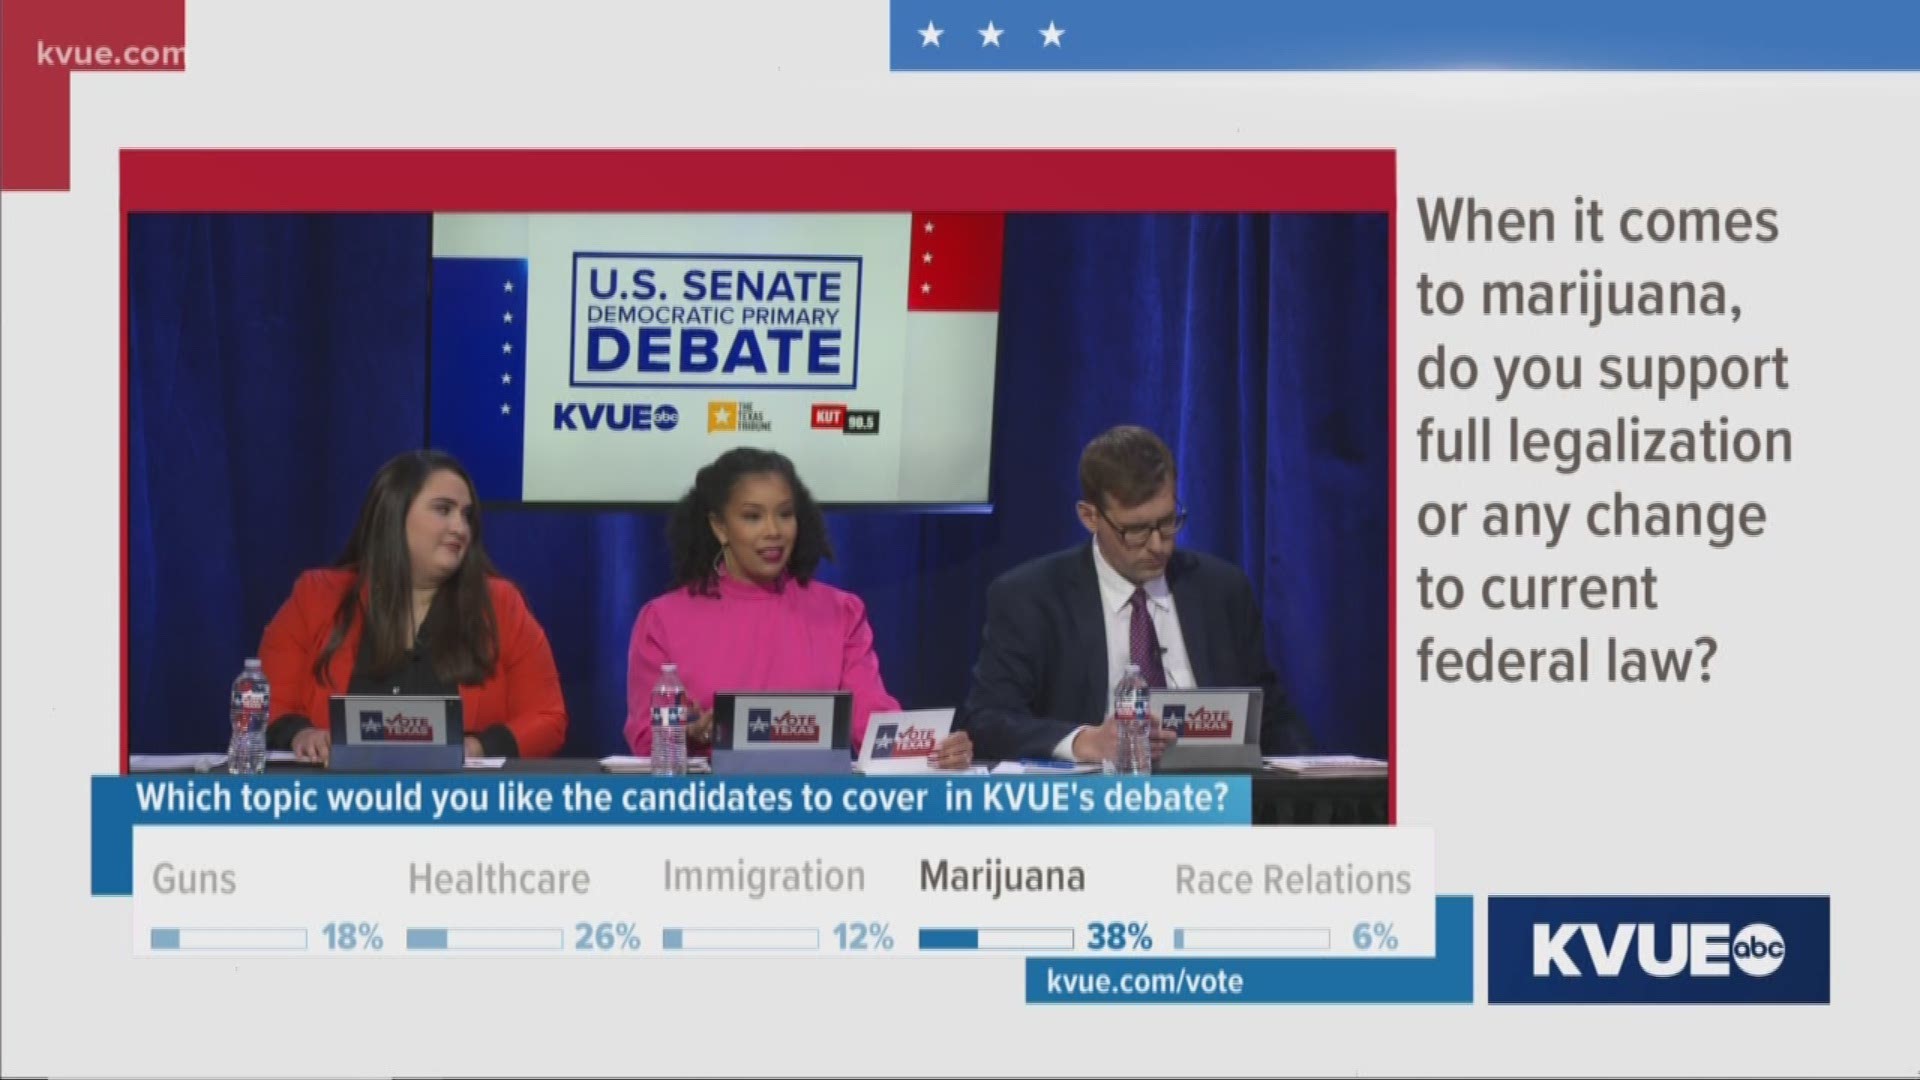 The U.S. Senate Democratic debate candidates were asked whether or not they support full legalization or any change to federal marijuana law?